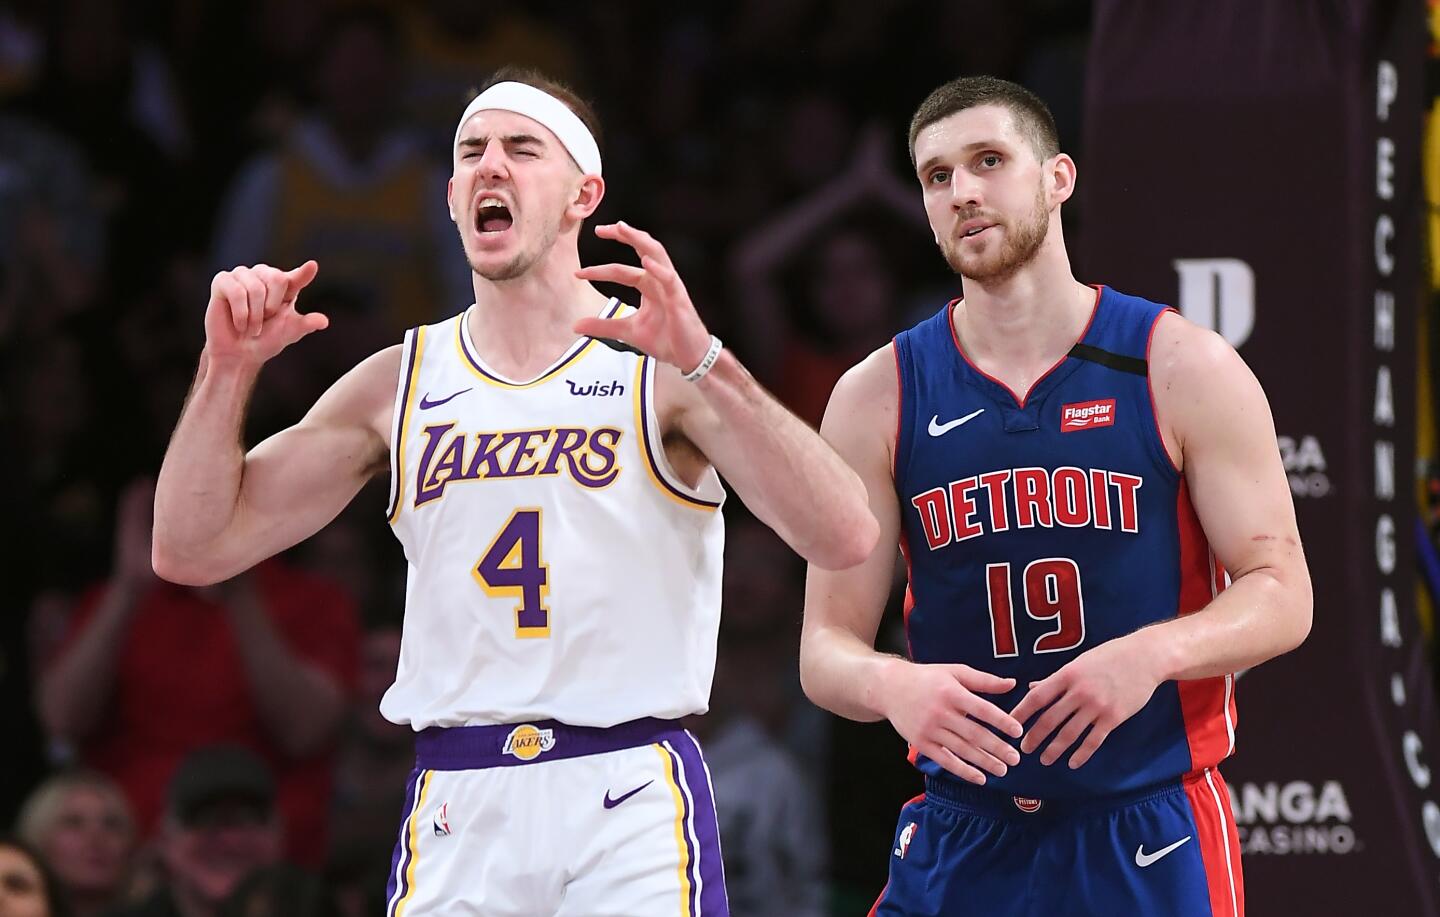 Lakers guard Alex Caruso celebrates a dunk in front of Detroit Pistons guard Svi Mykhailiuk during the fourth quarter.